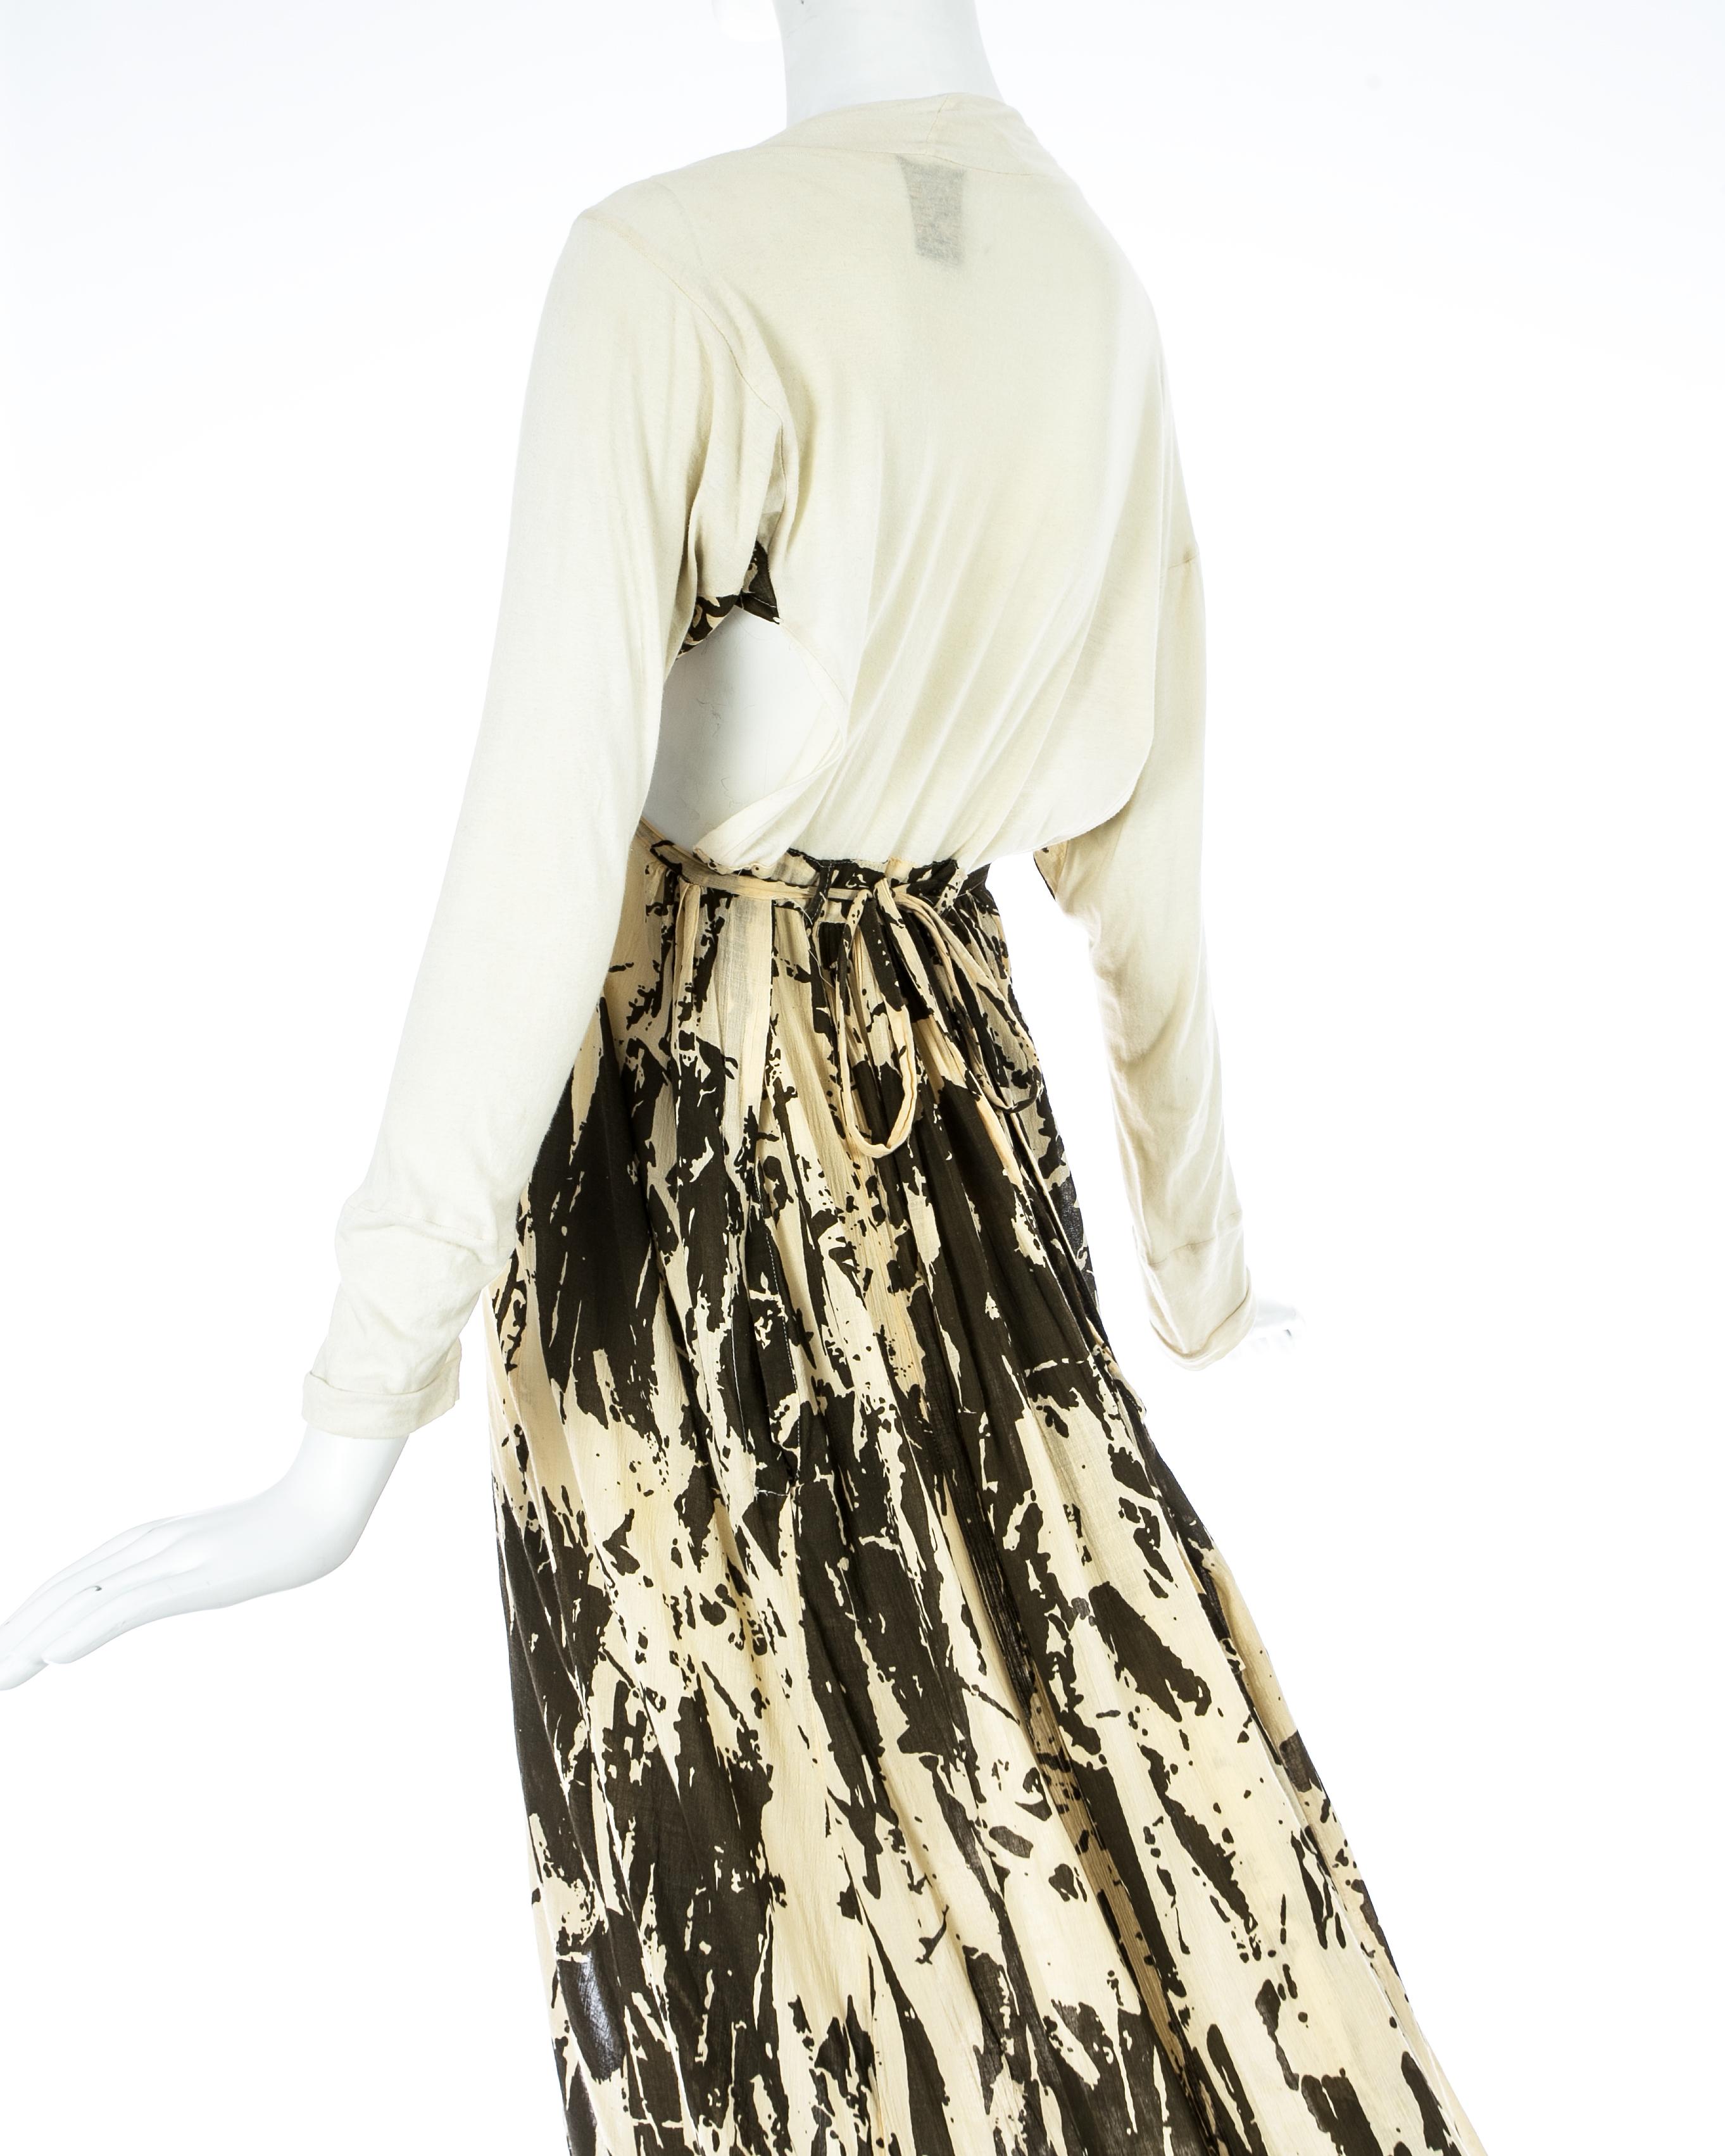 Worlds End cream and brown acid wash toga dress with extra long train, S/S 1982 For Sale 1